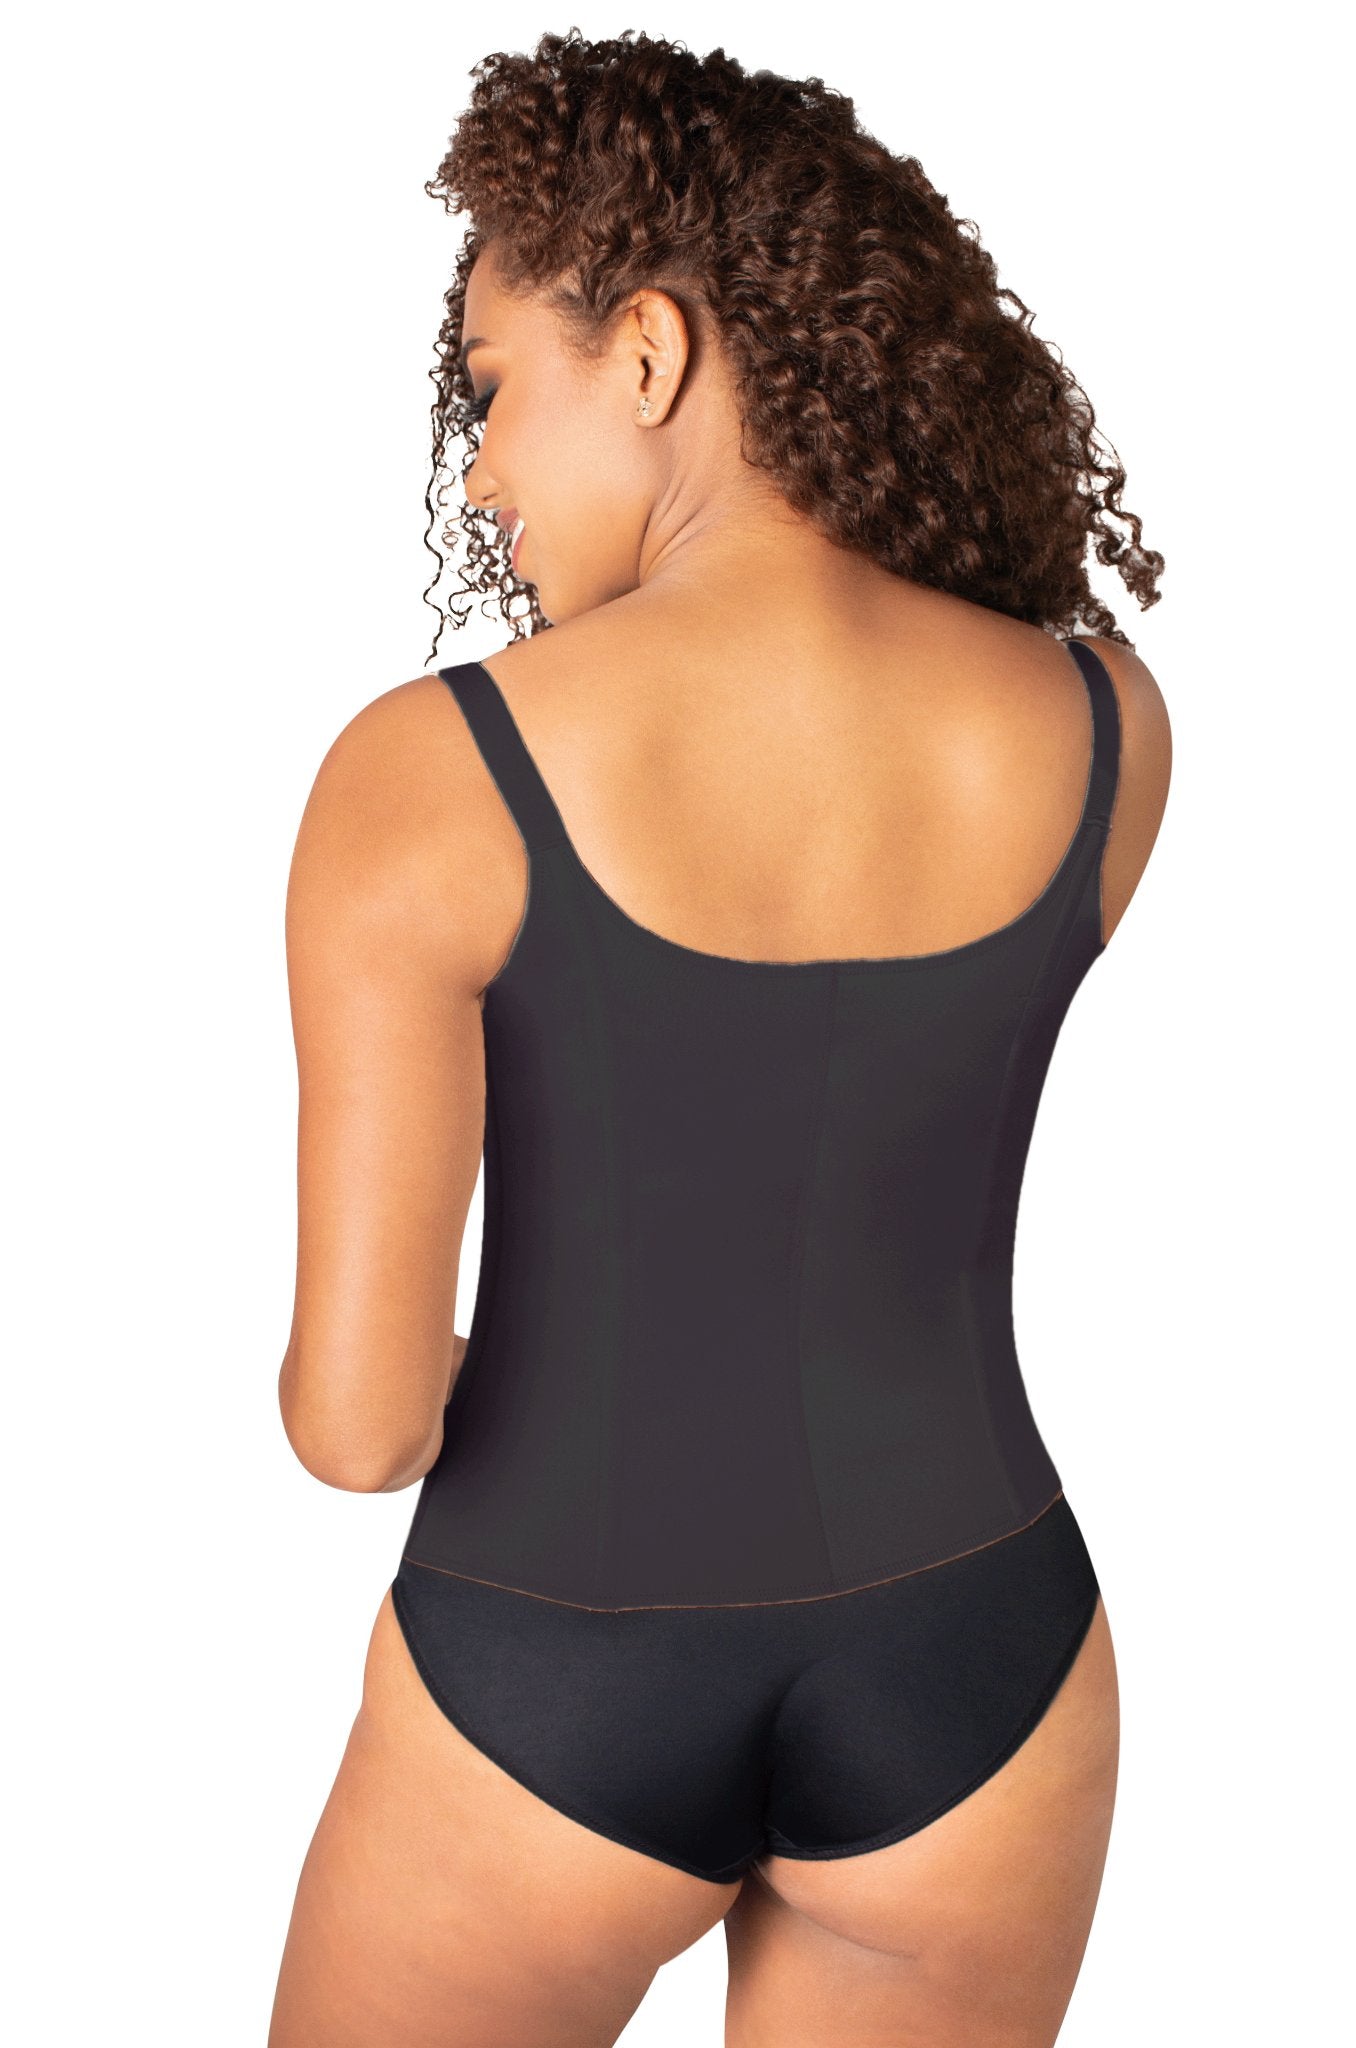 Vedette Evonne Firm Compression Braless Body Shaper in Panty 107/209